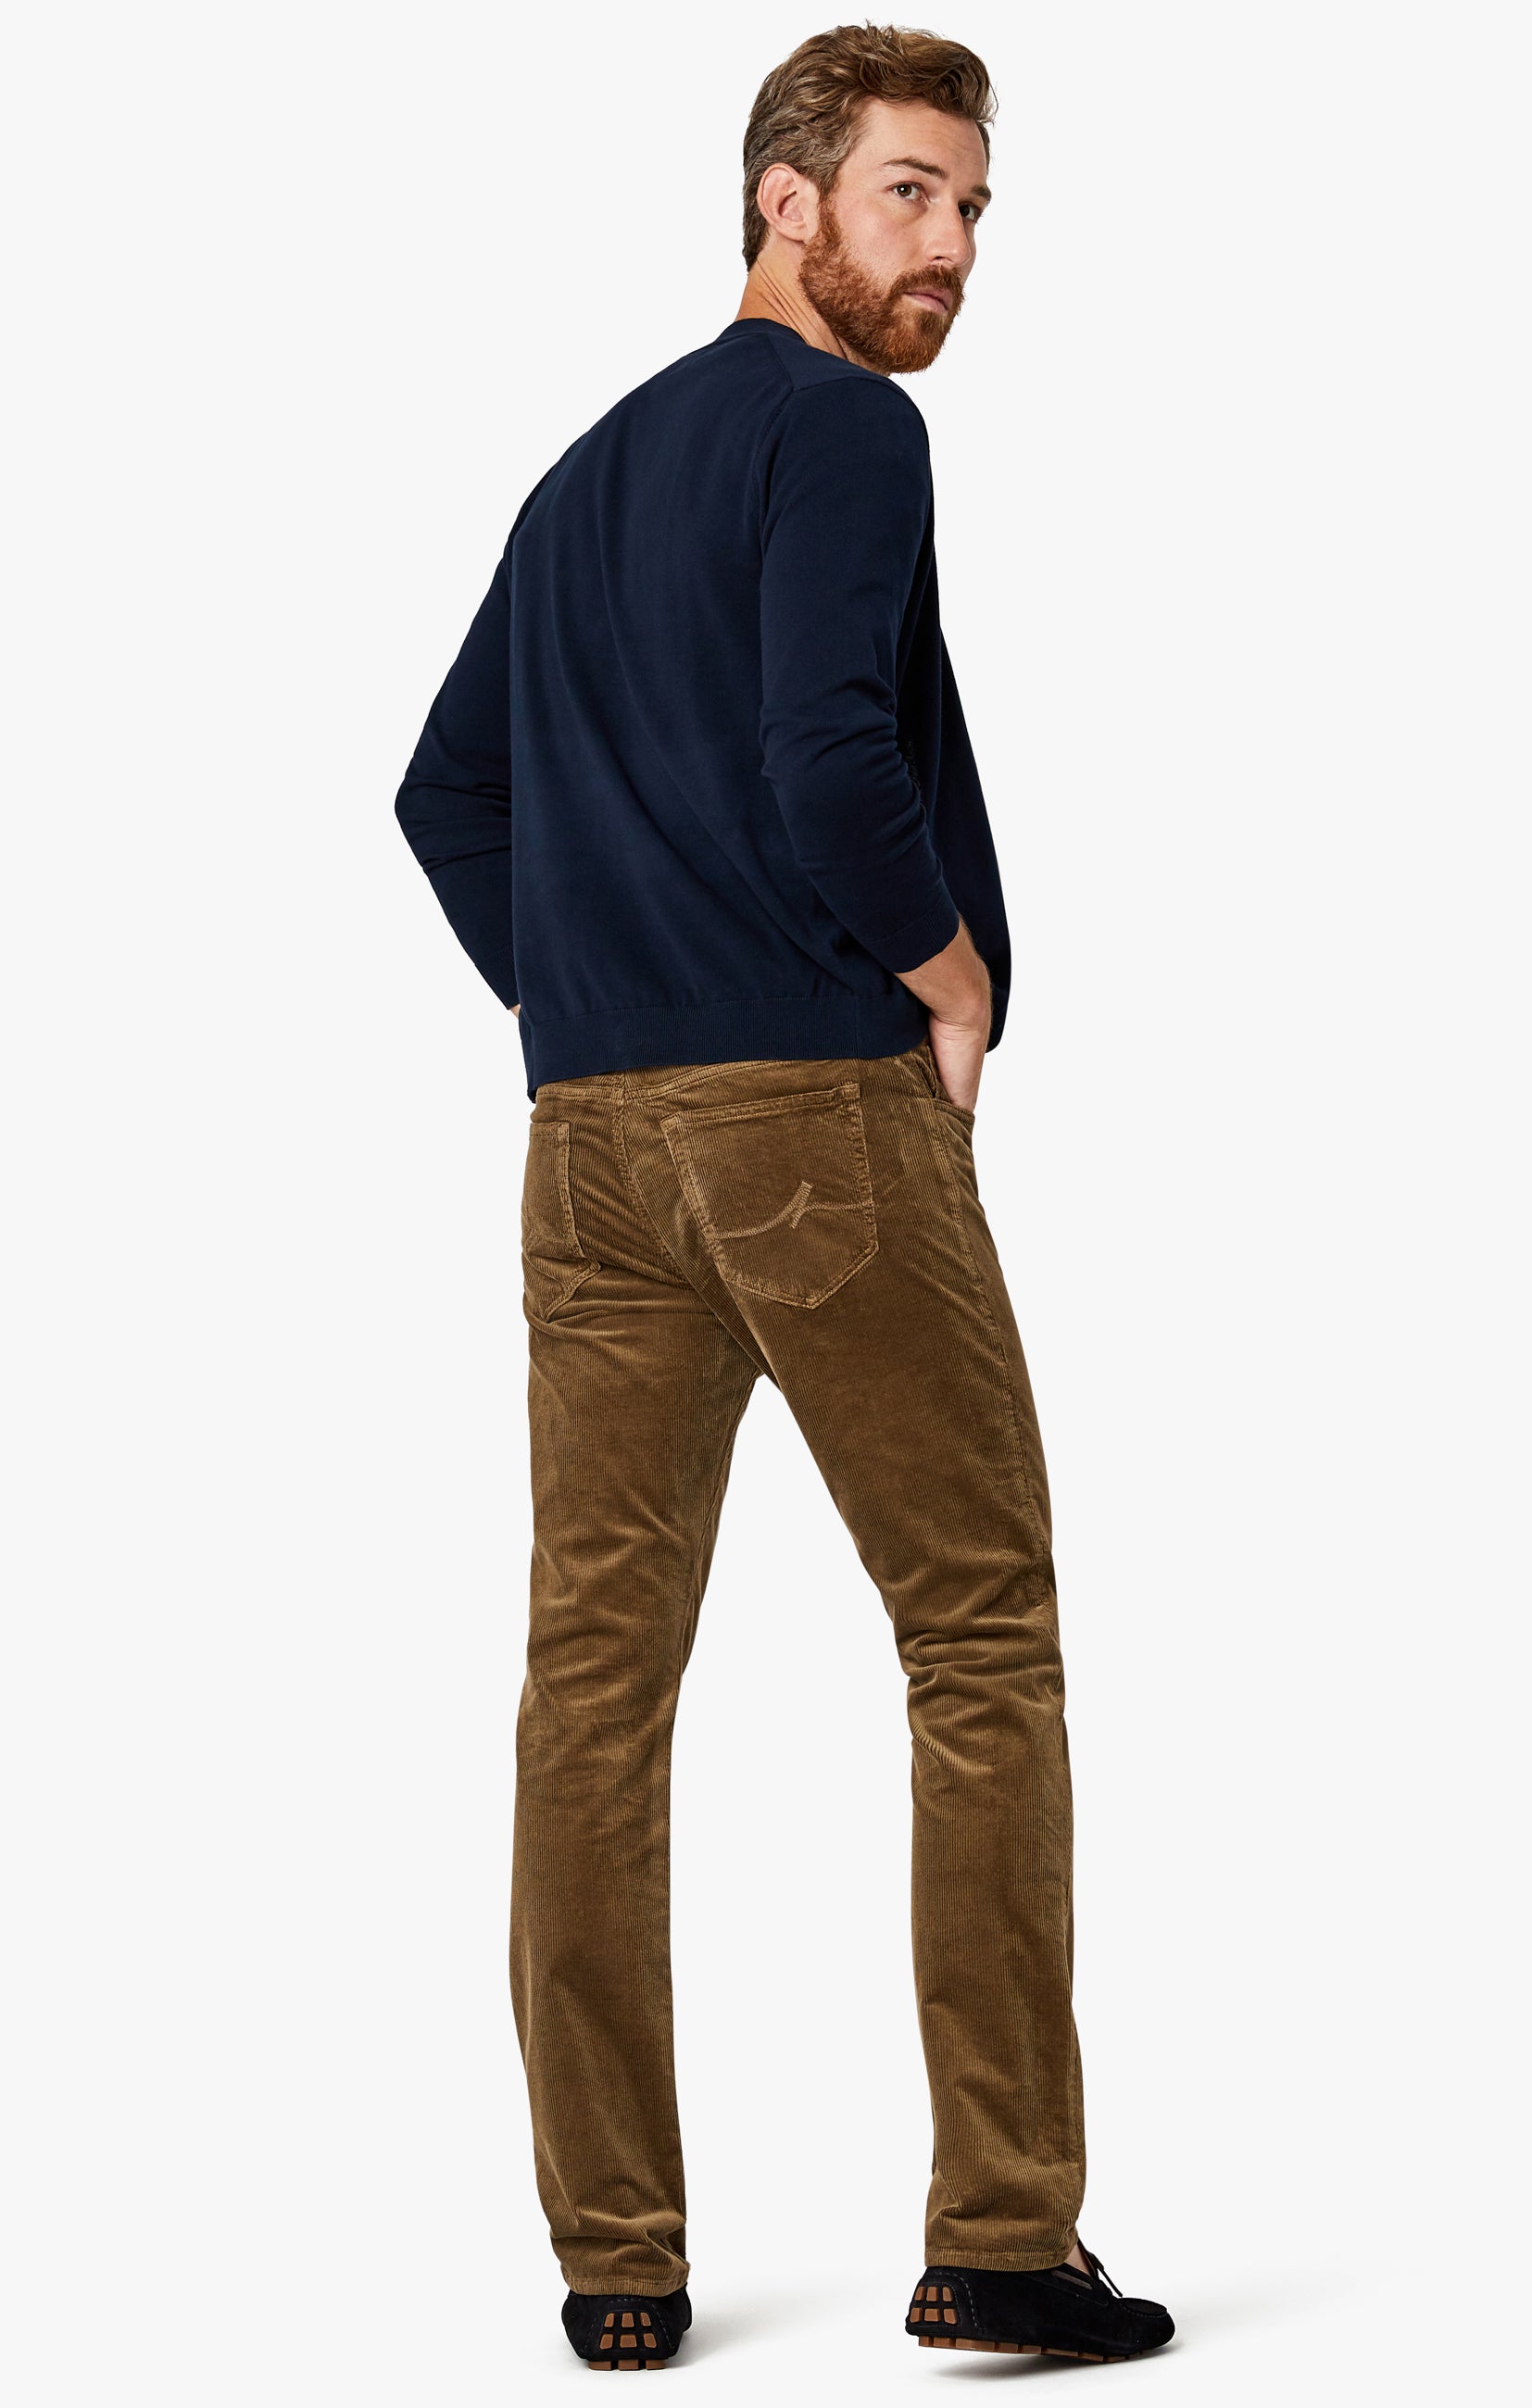 Charisma Relaxed Straight Pants in Tobacco Cord Image 1